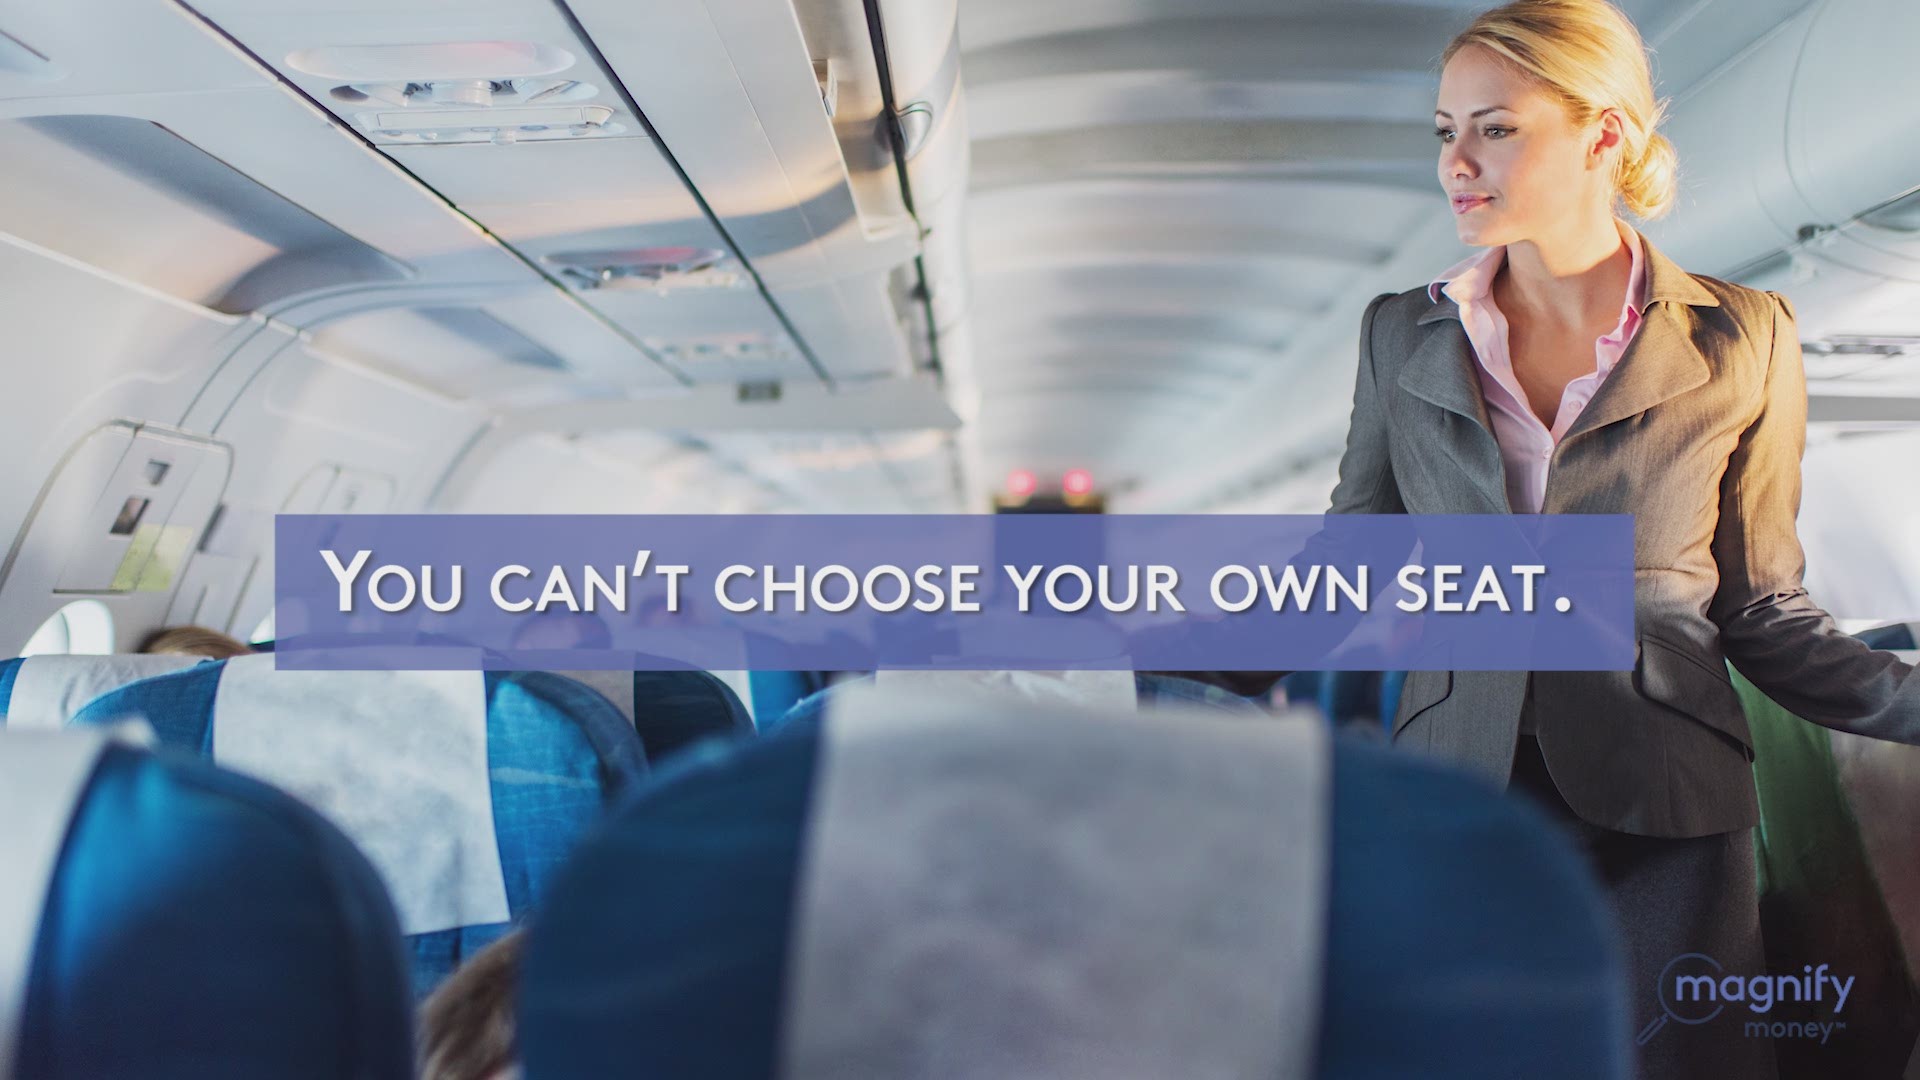 Airlines have come up with a new way to make money off passengers: 'Basic economy fares'